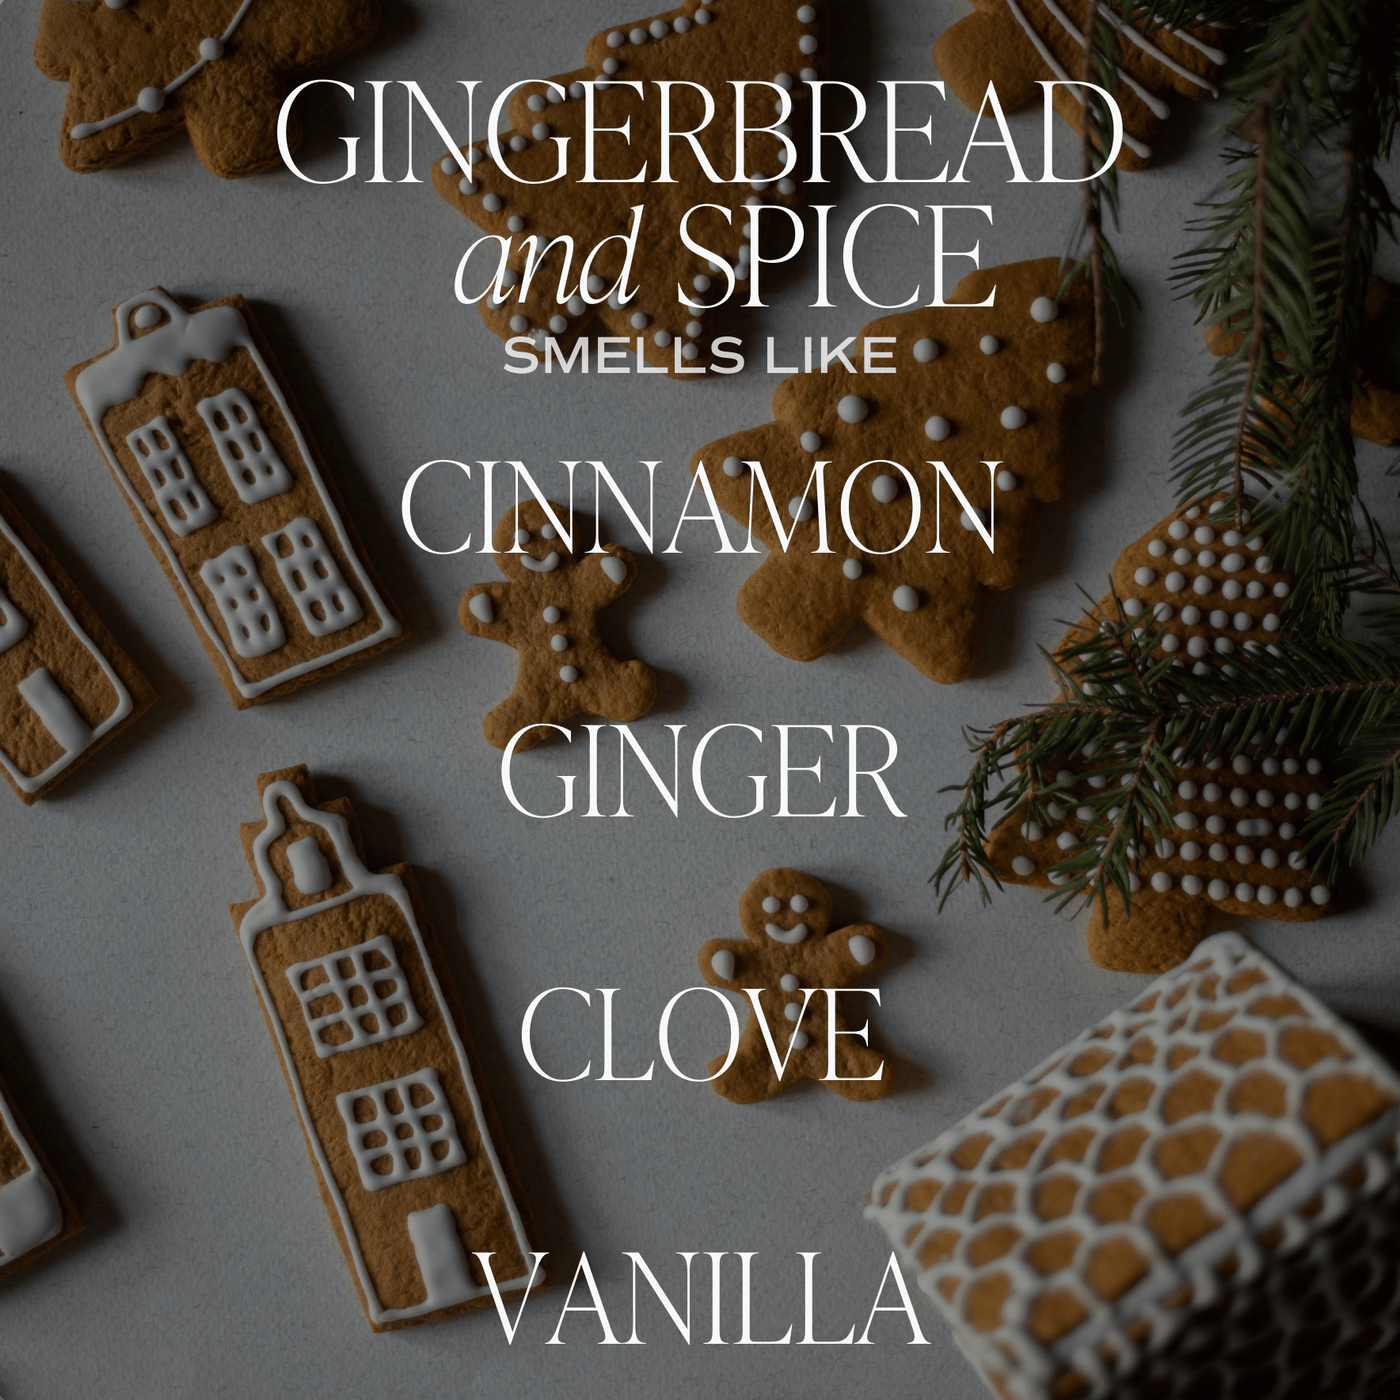 Gingerbread and Spice Soy Candle - Amber Jar - 11 oz - Sweet Water Decor - Candles